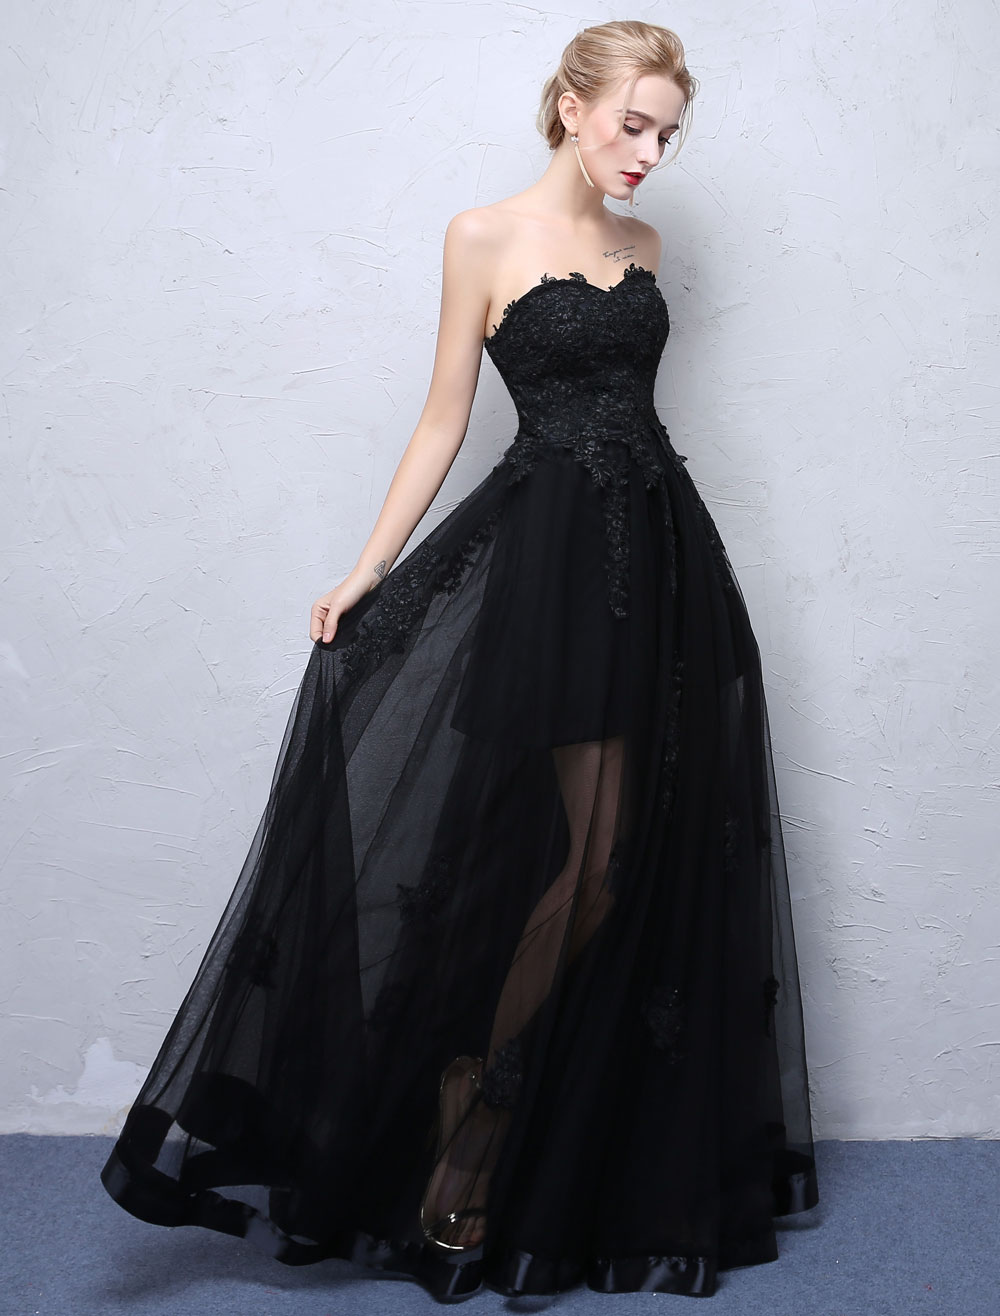 Black Prom Dresses Strapless Long Party Dress Lace Applique Sweetheart Illusion Formal Evening Dress (Wedding Cheap Party Dress) photo